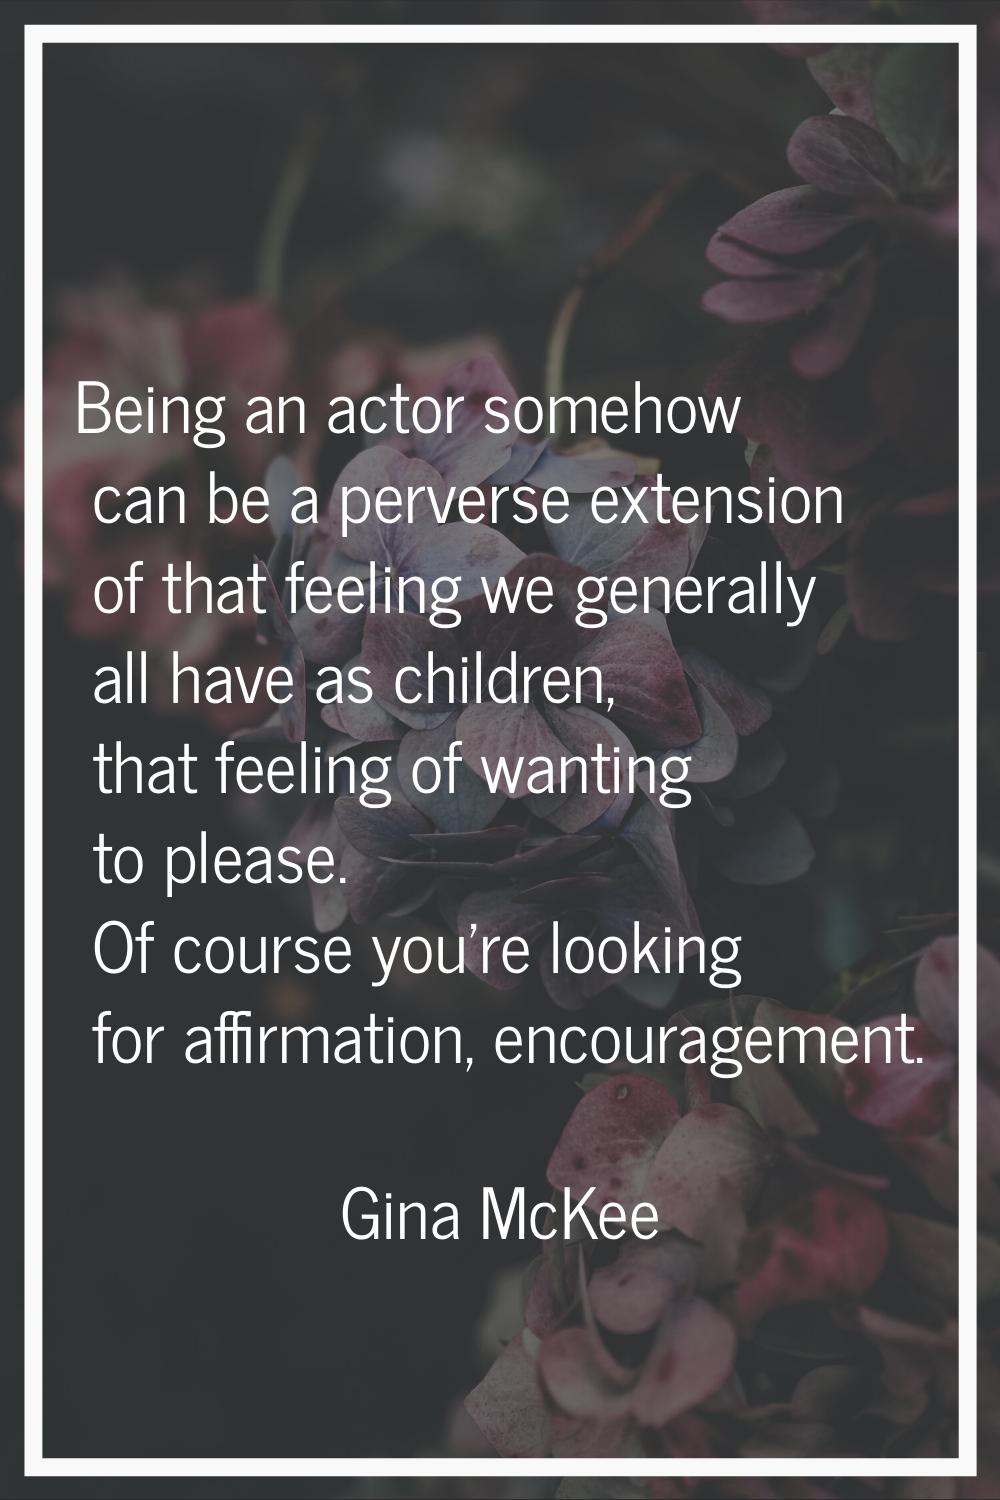 Being an actor somehow can be a perverse extension of that feeling we generally all have as childre